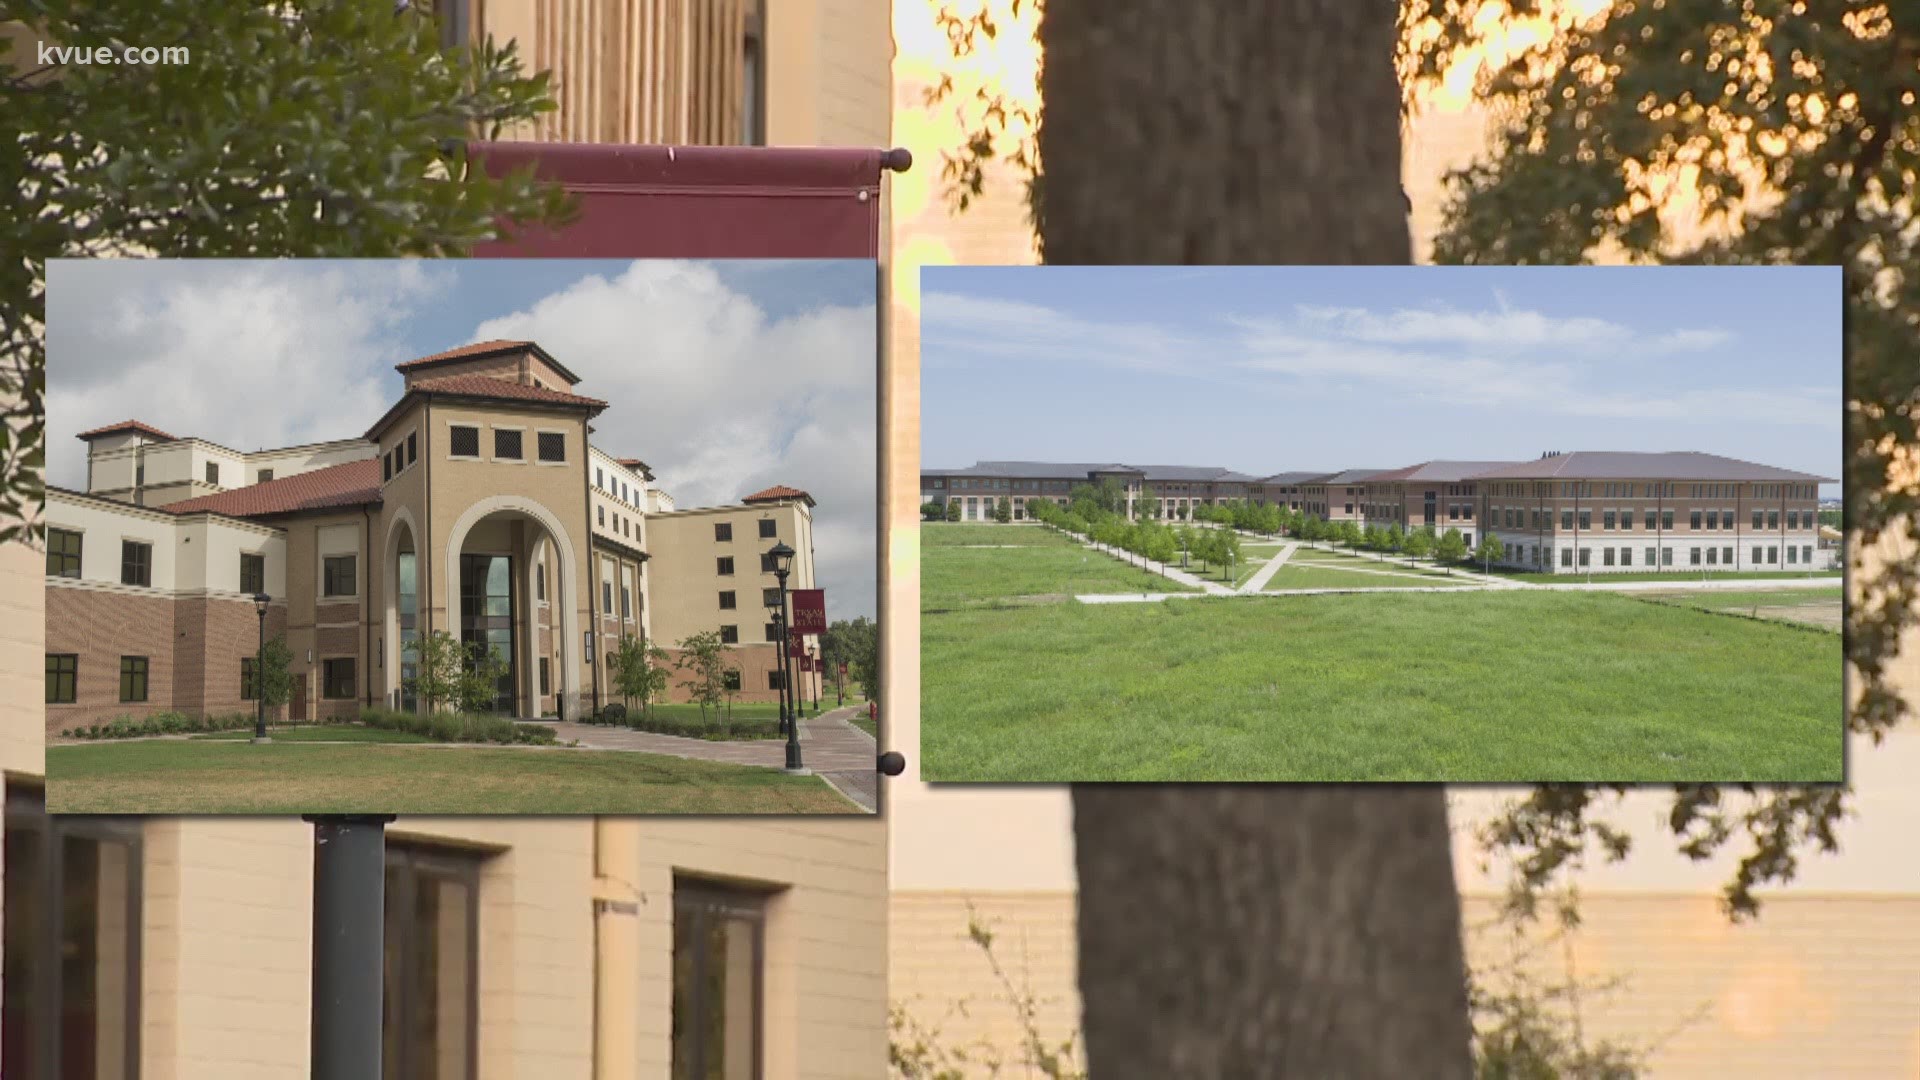 Texas State is accepting submissions to rename its Angelina and San Gabriel residence halls.